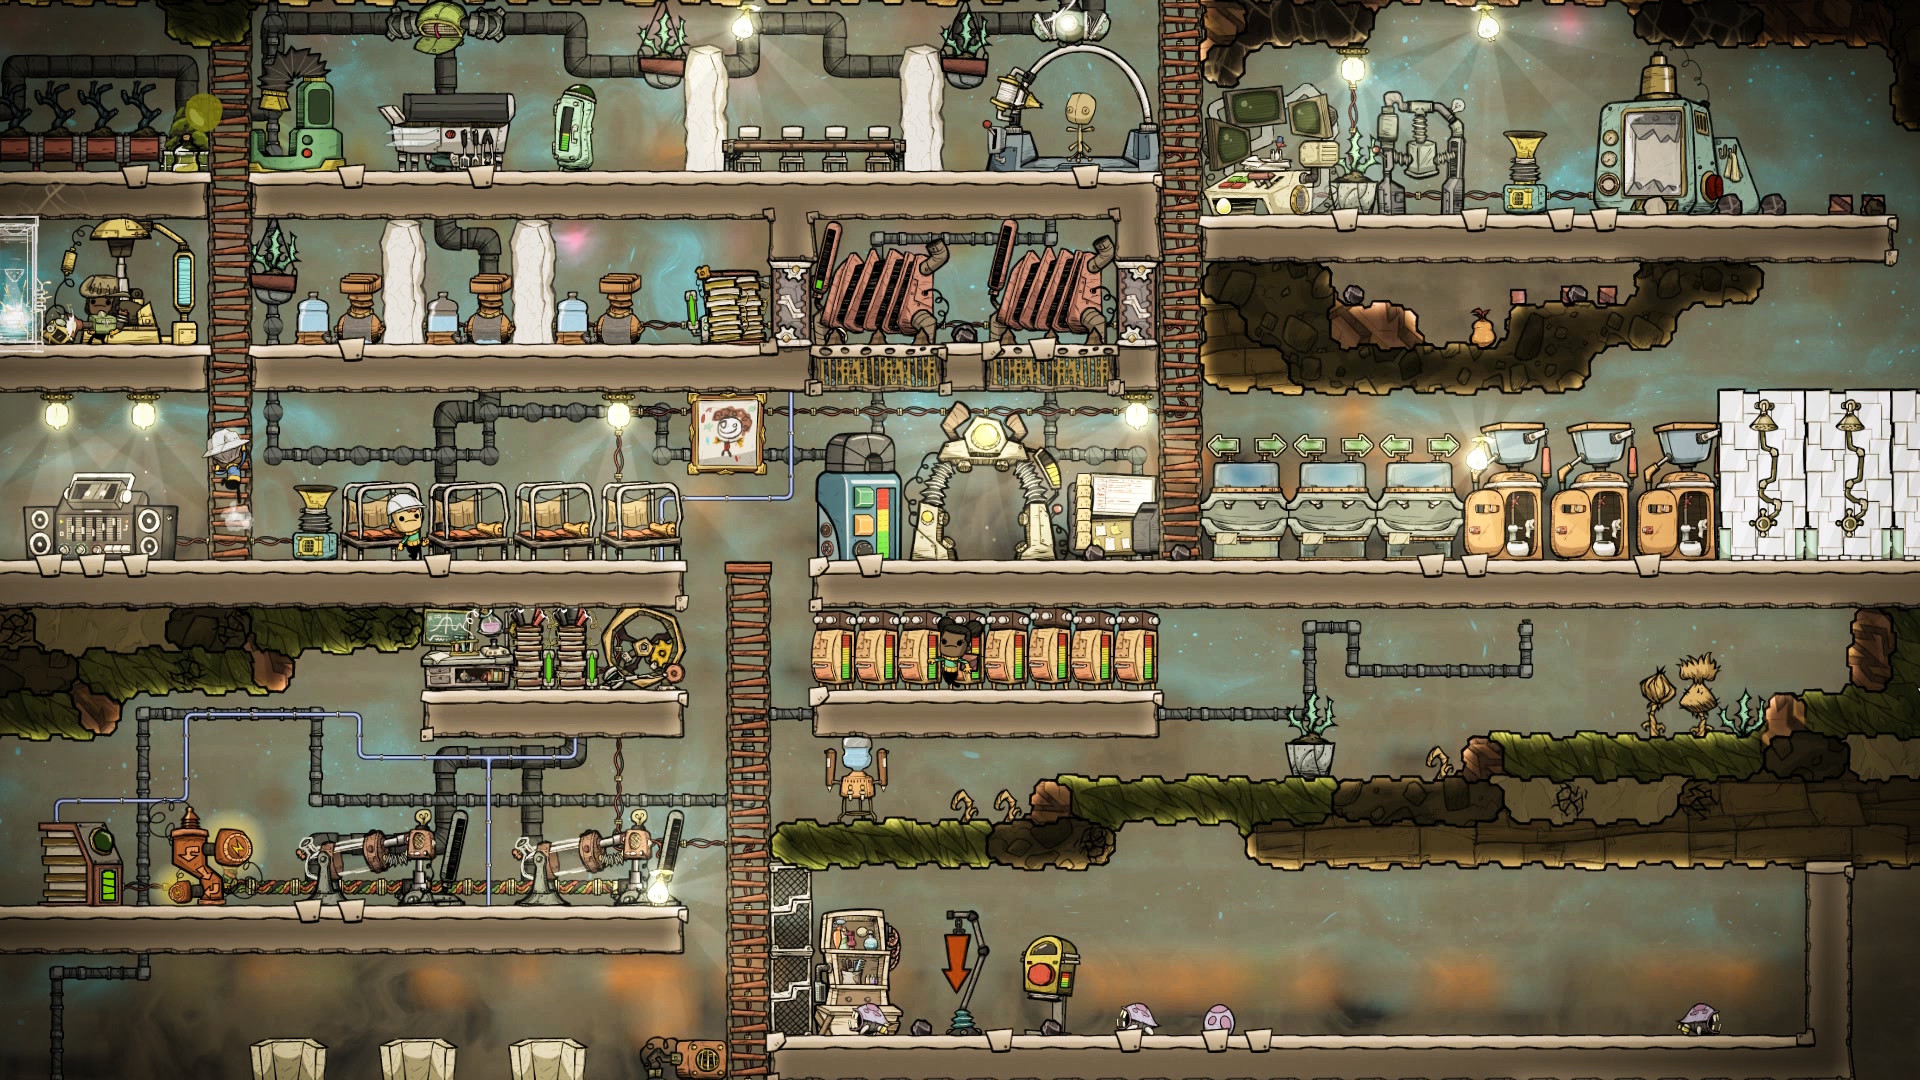 oxygen not included wiki